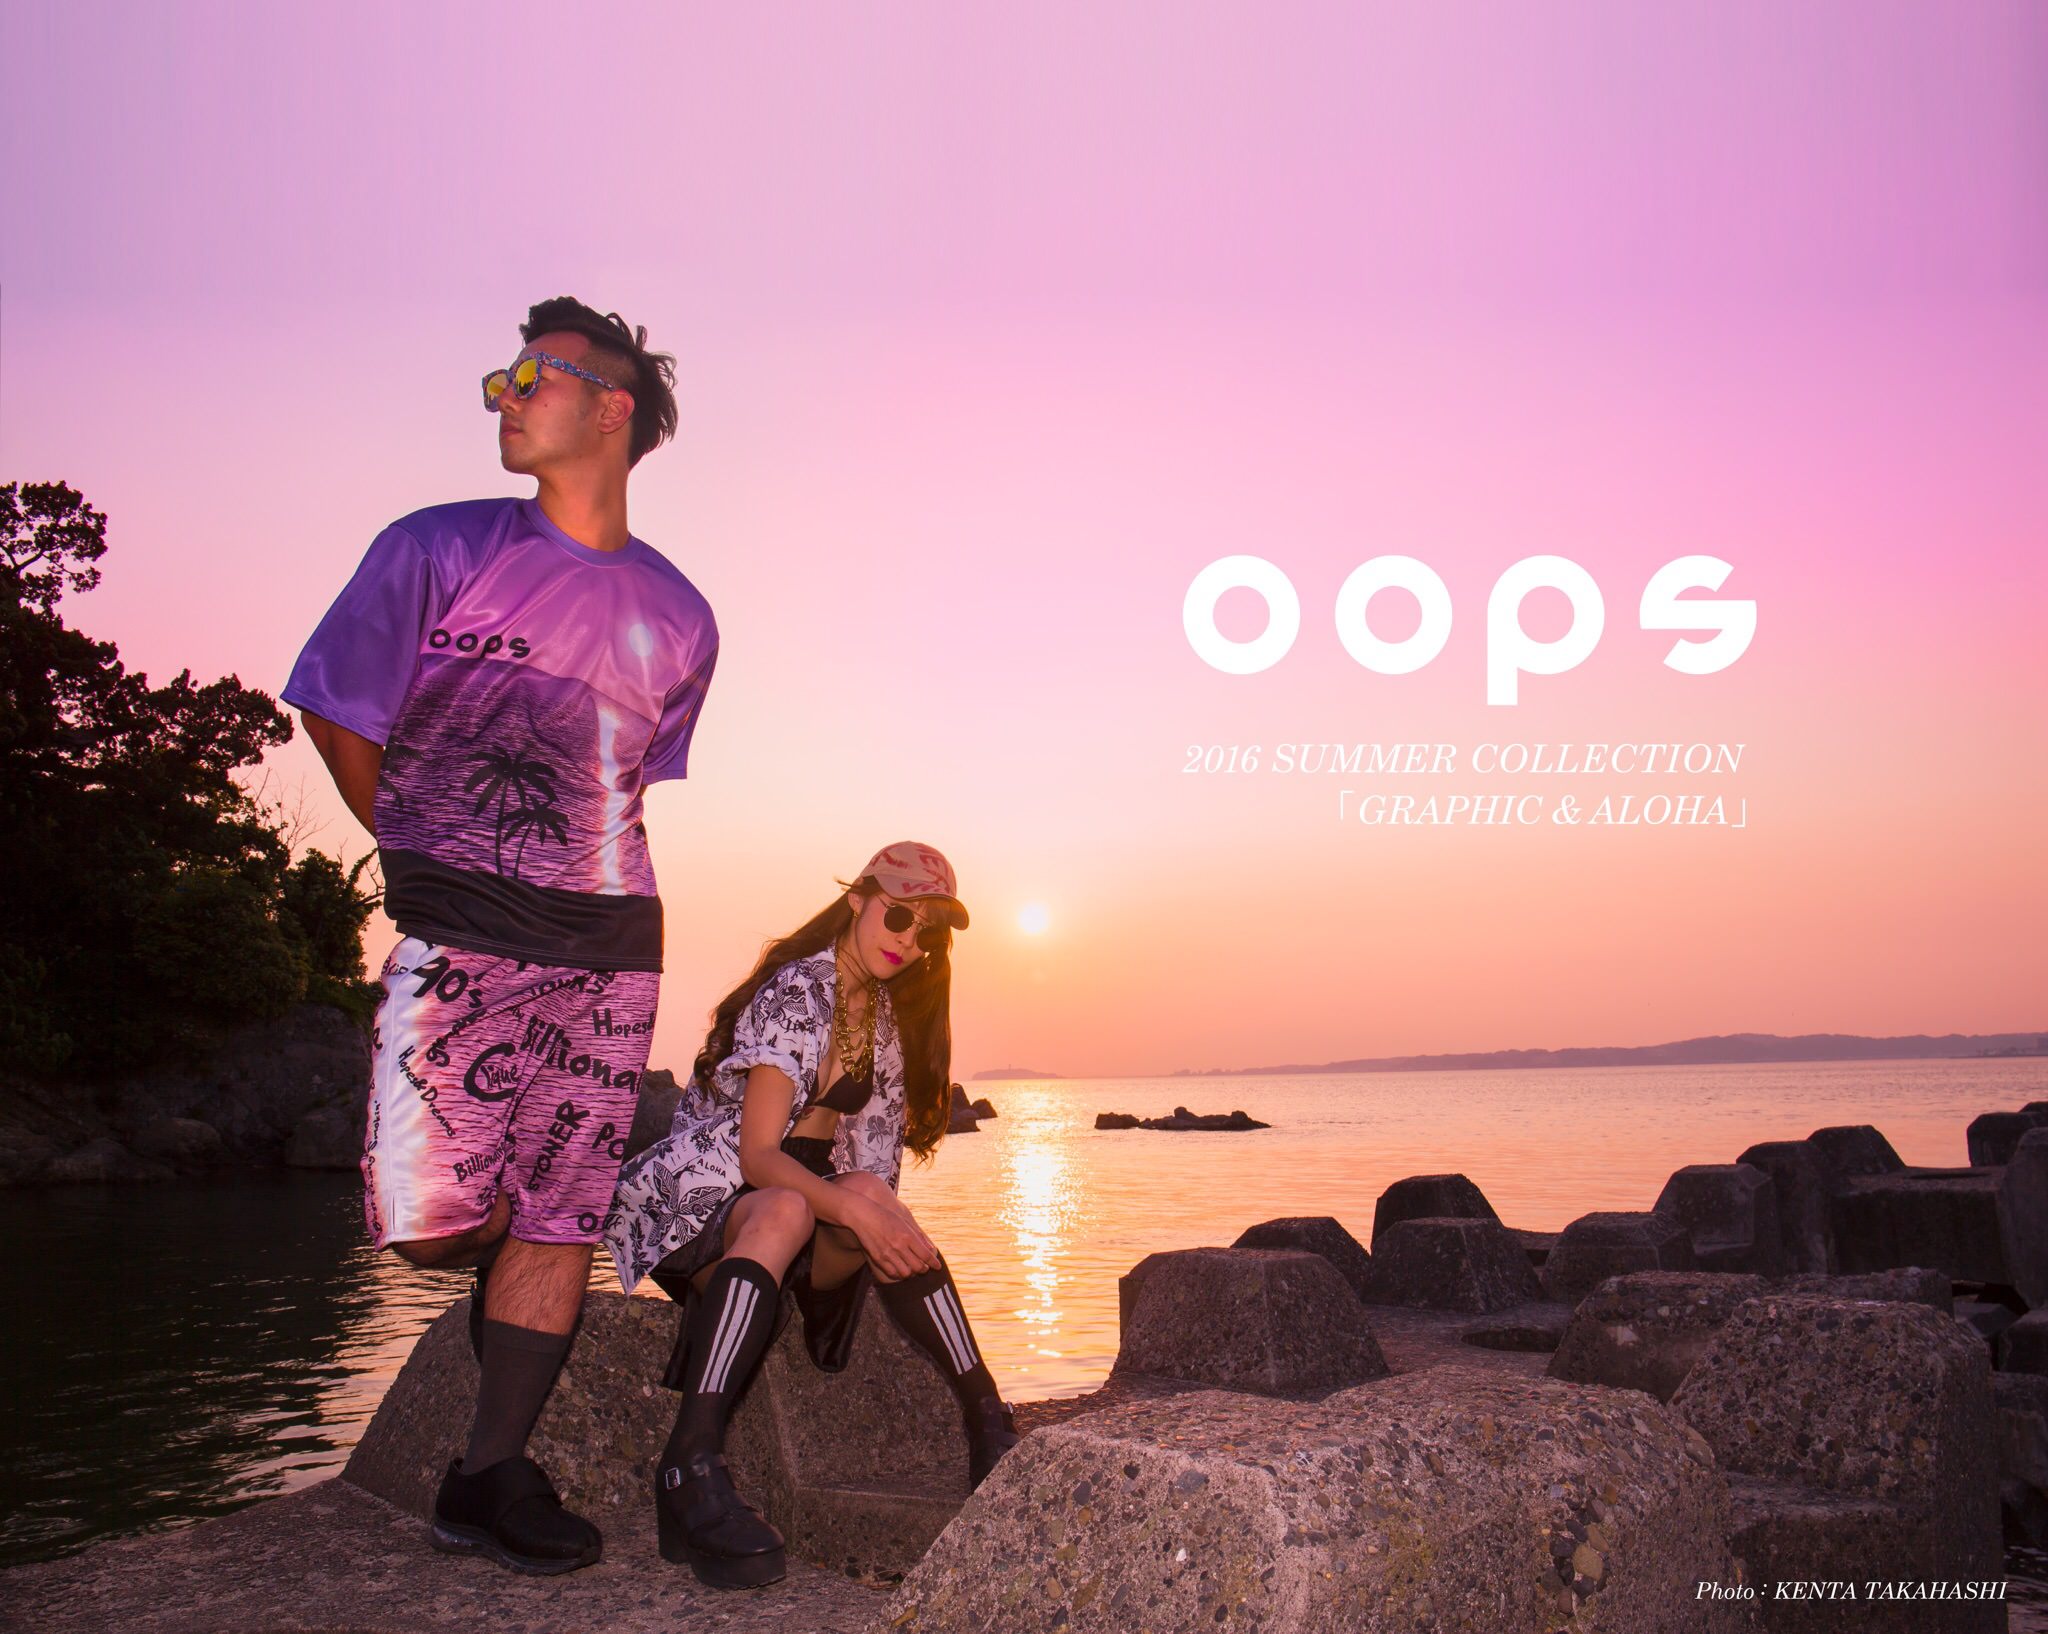 oops 2016 SUMMER COLLECTION 【GRAPHIC & ALOHA】